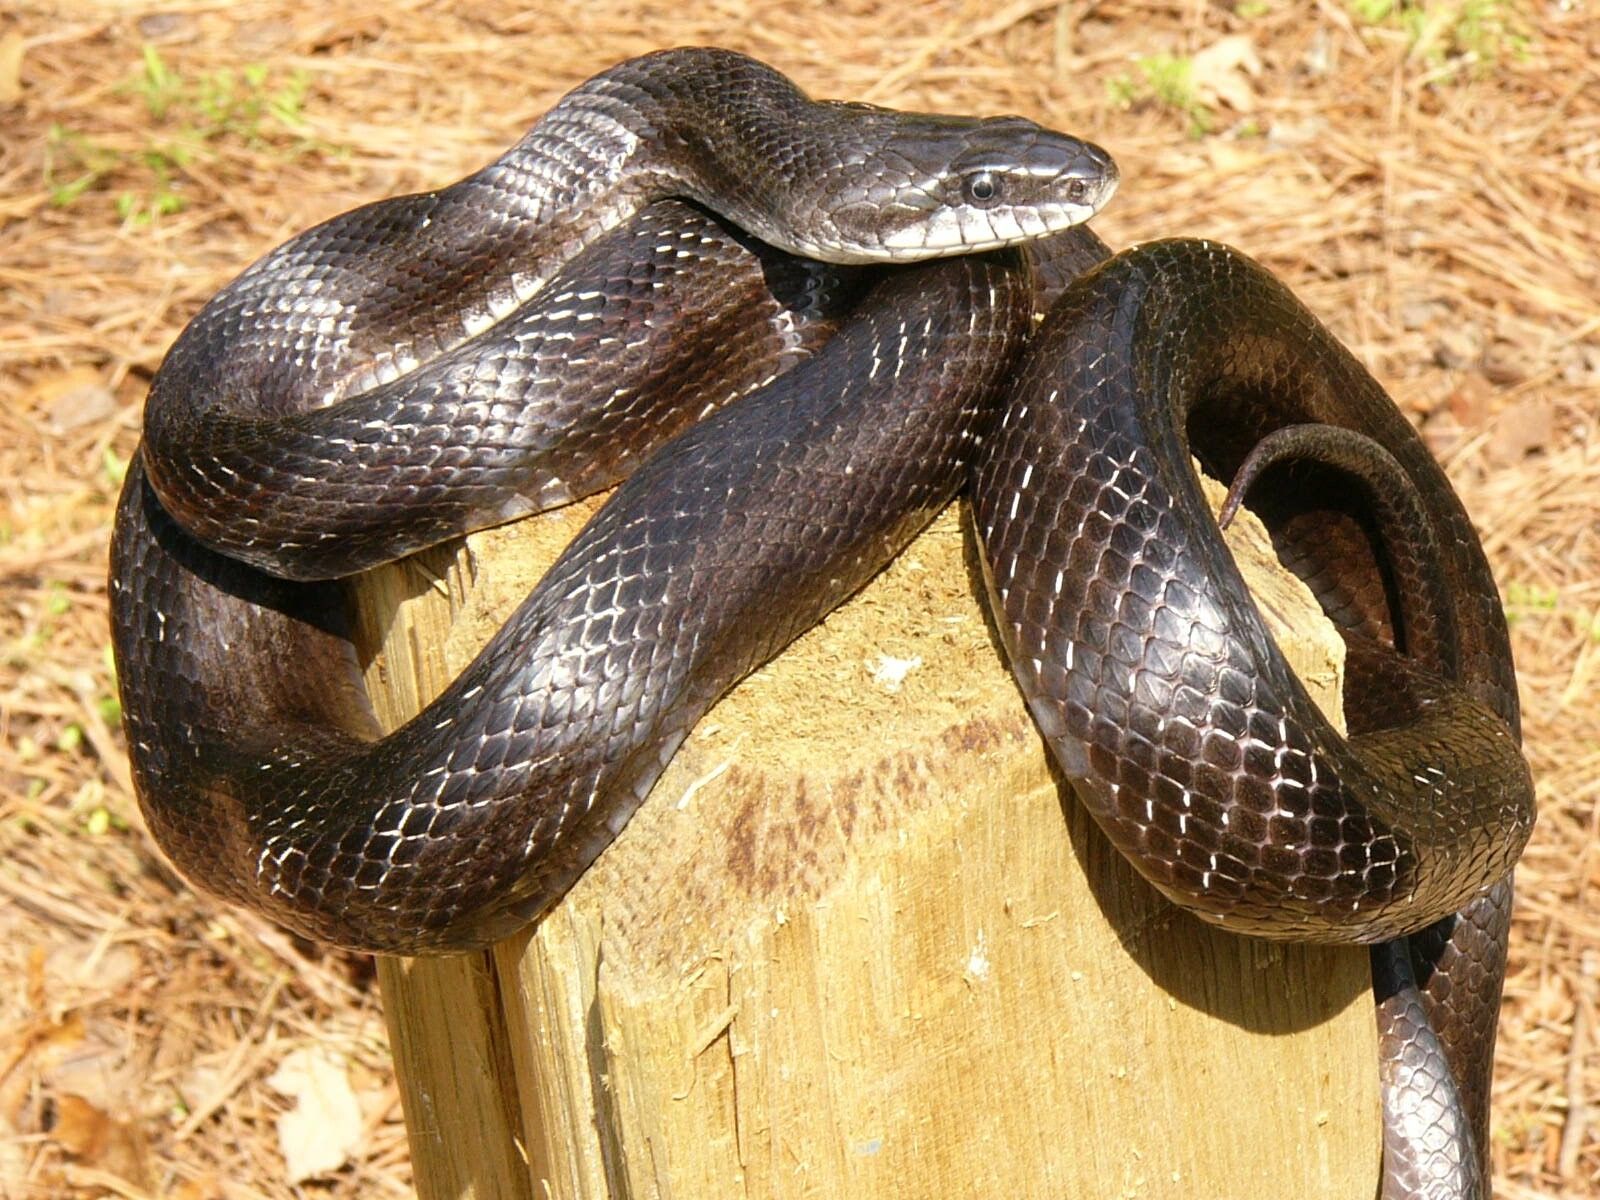 Known for its climbing ability, the harmless black rat snake is notorious for accidentally crawling inside people's home. (Photo/John Jensen, Georgia DNR)